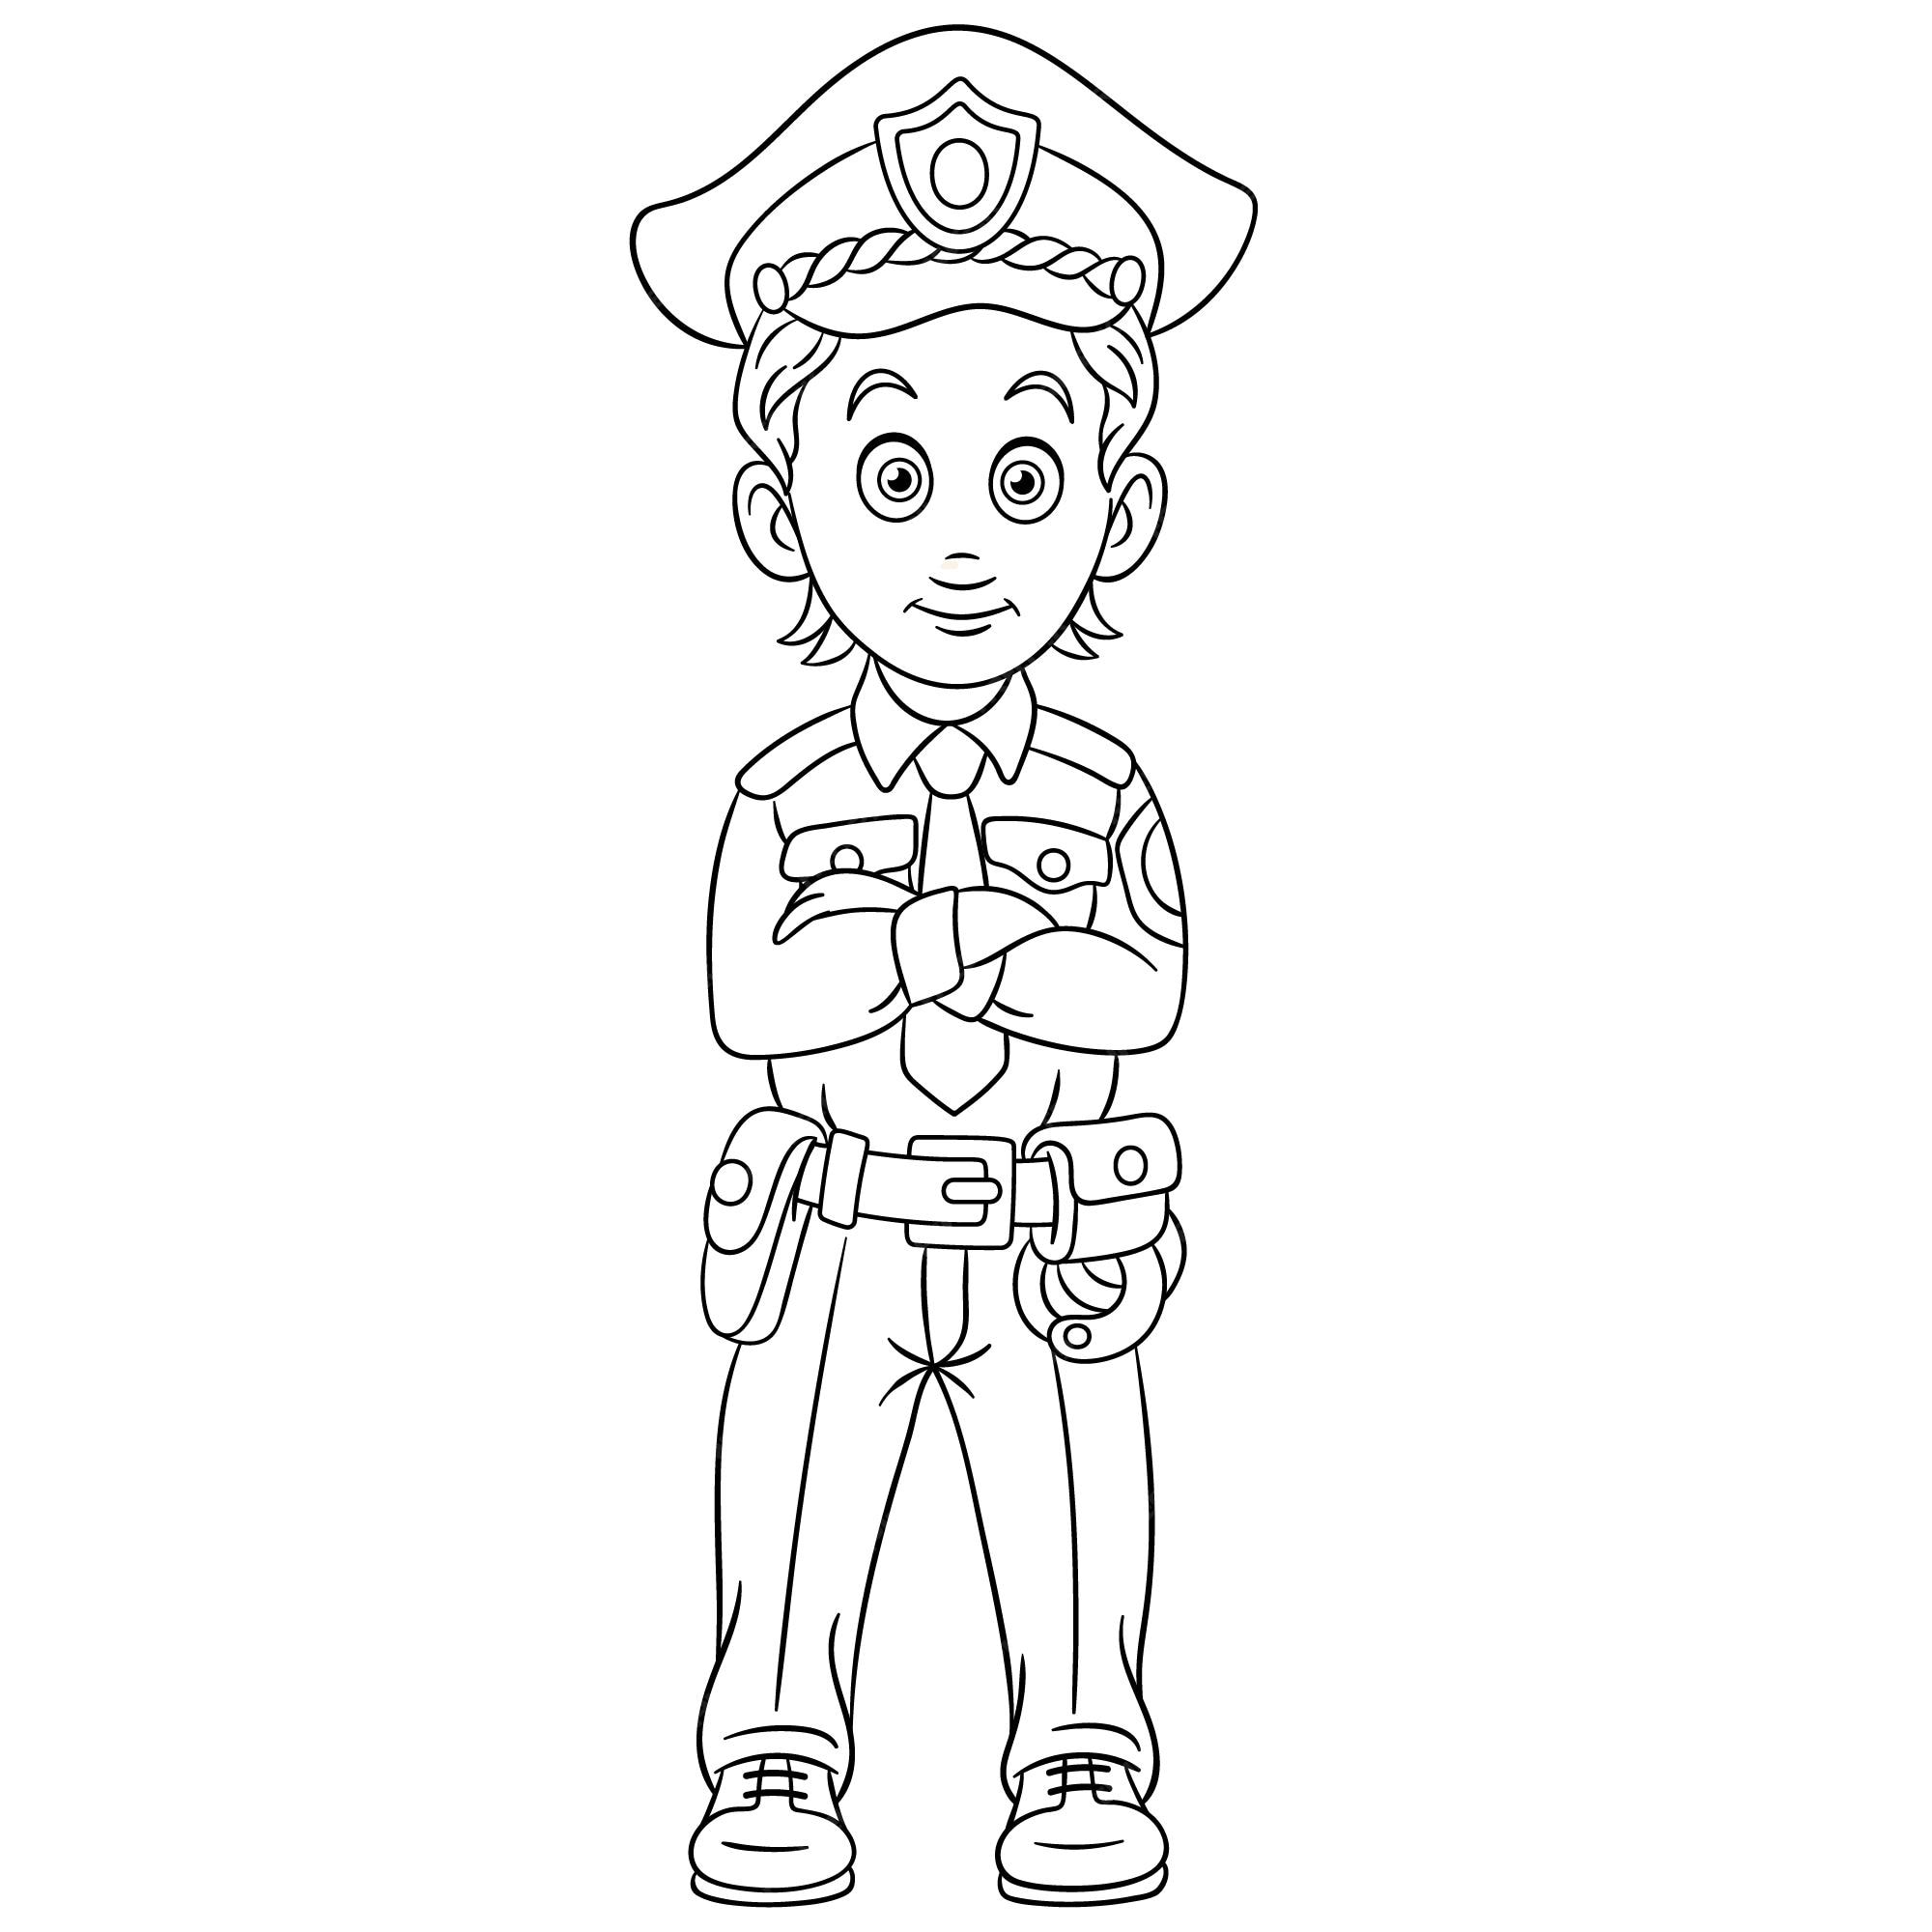 Premium vector cute young policeman cartoon coloring book page for kids